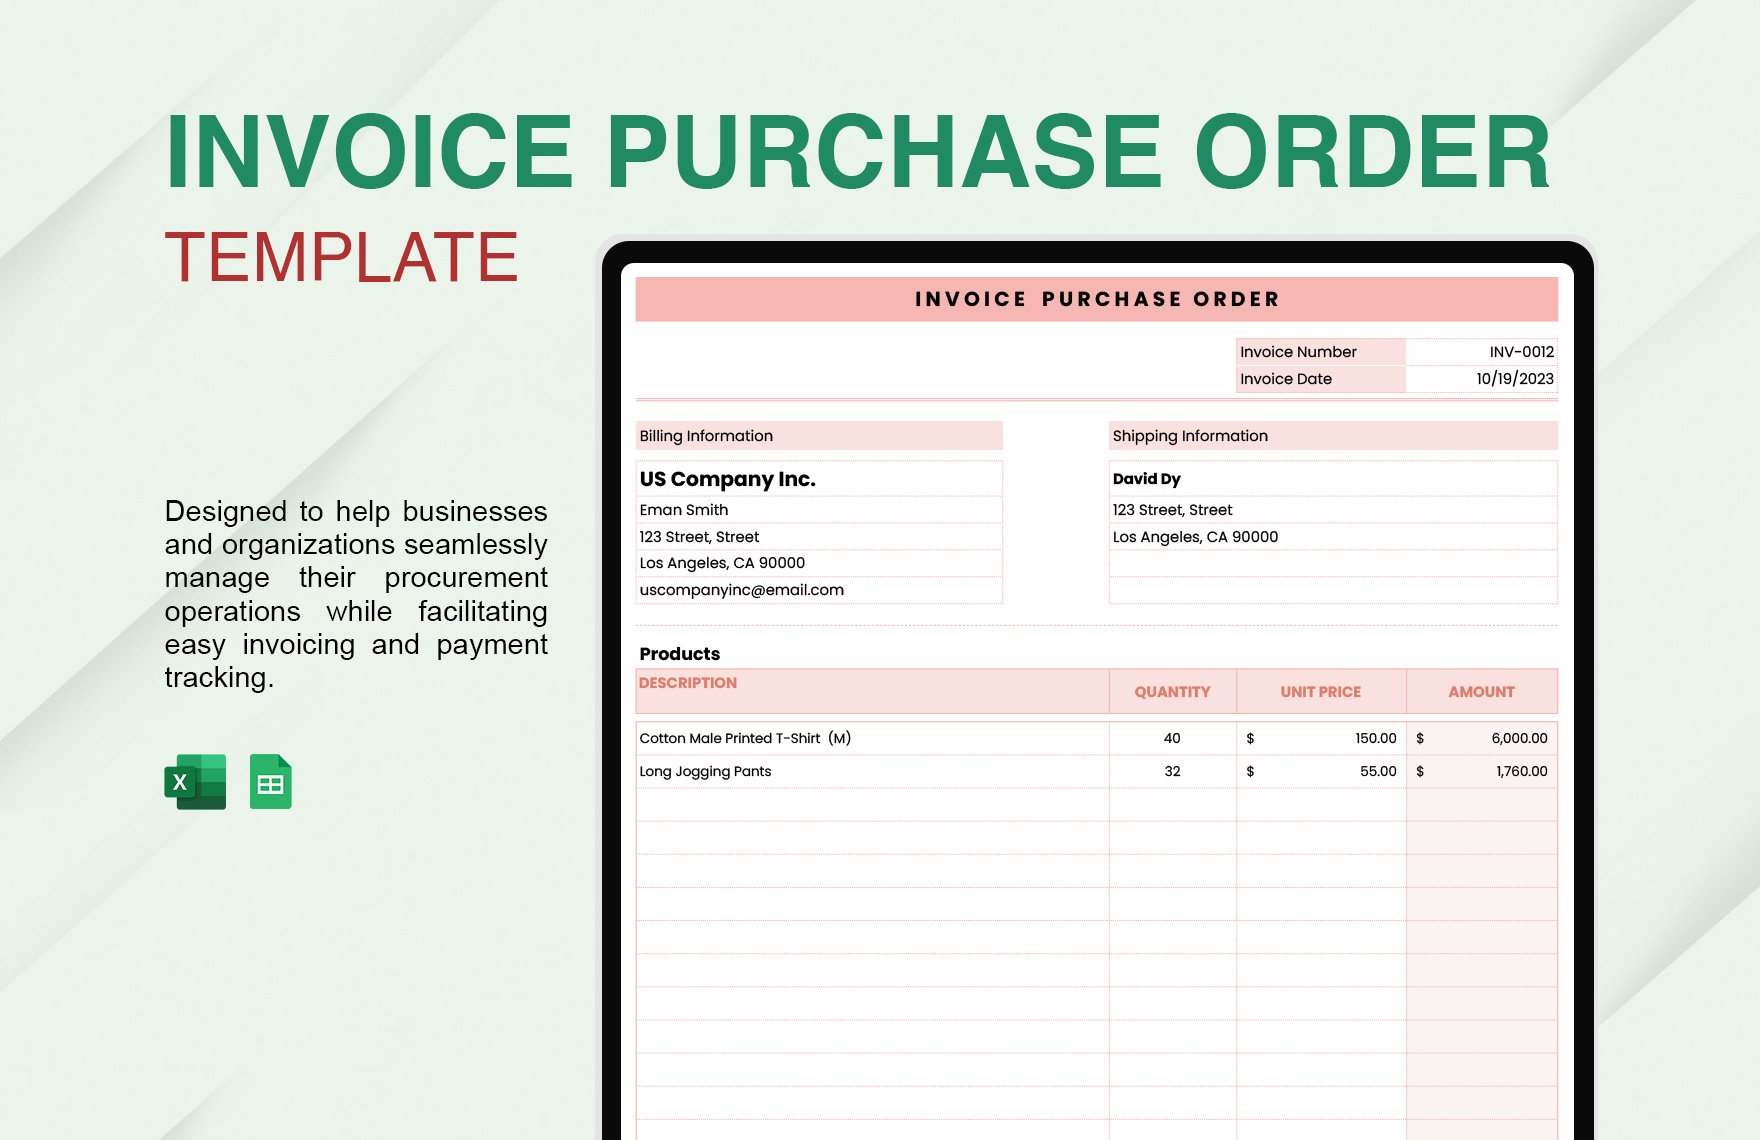 Free Invoice Purchase Order Template in Excel, Google Sheets